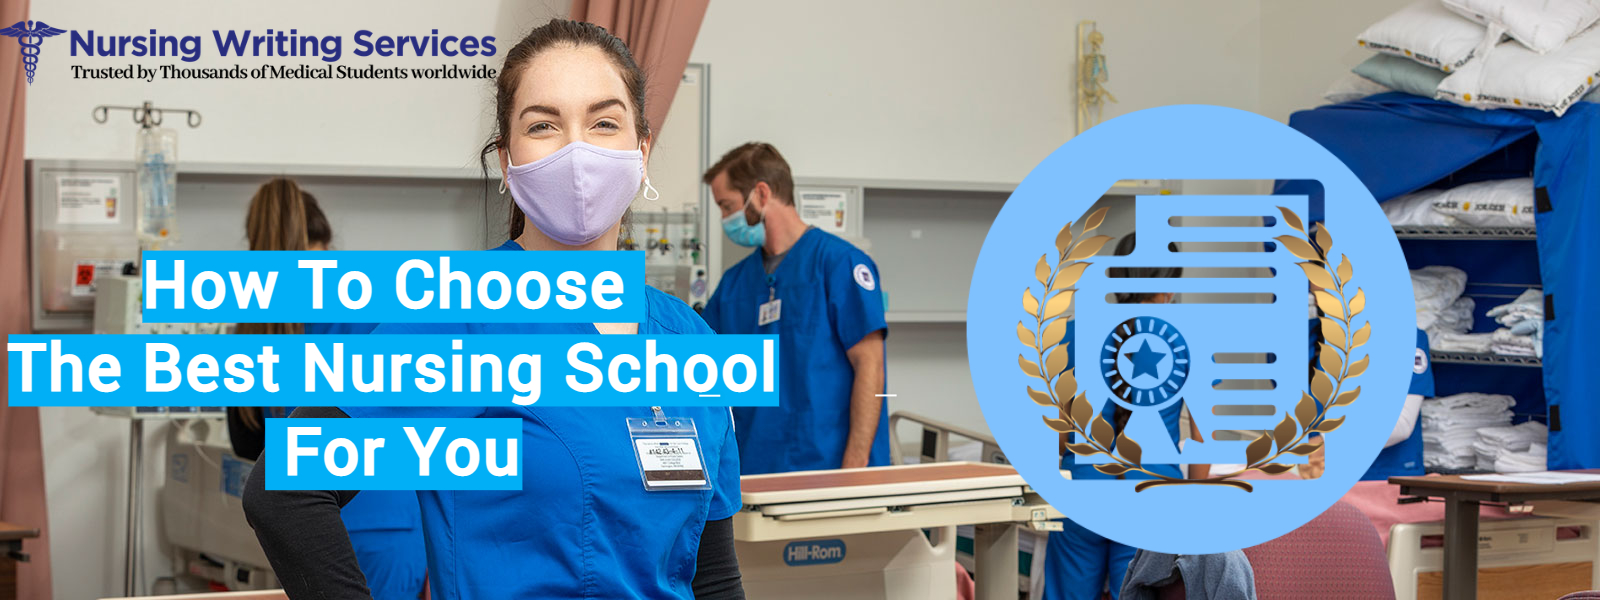 How To Choose The Best Nursing School For You